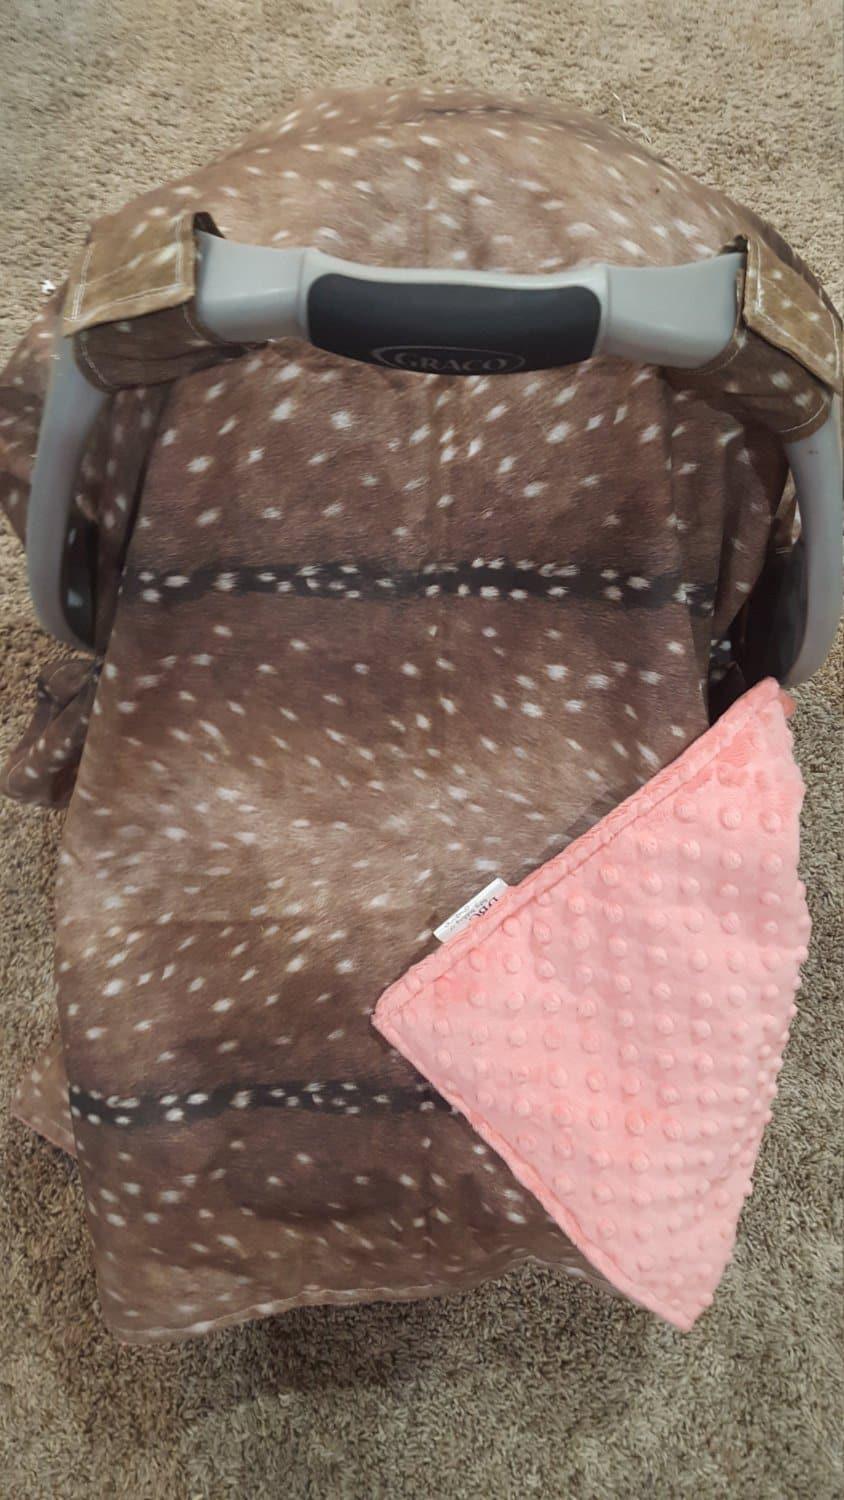 LV CAR SEAT CANOPIES